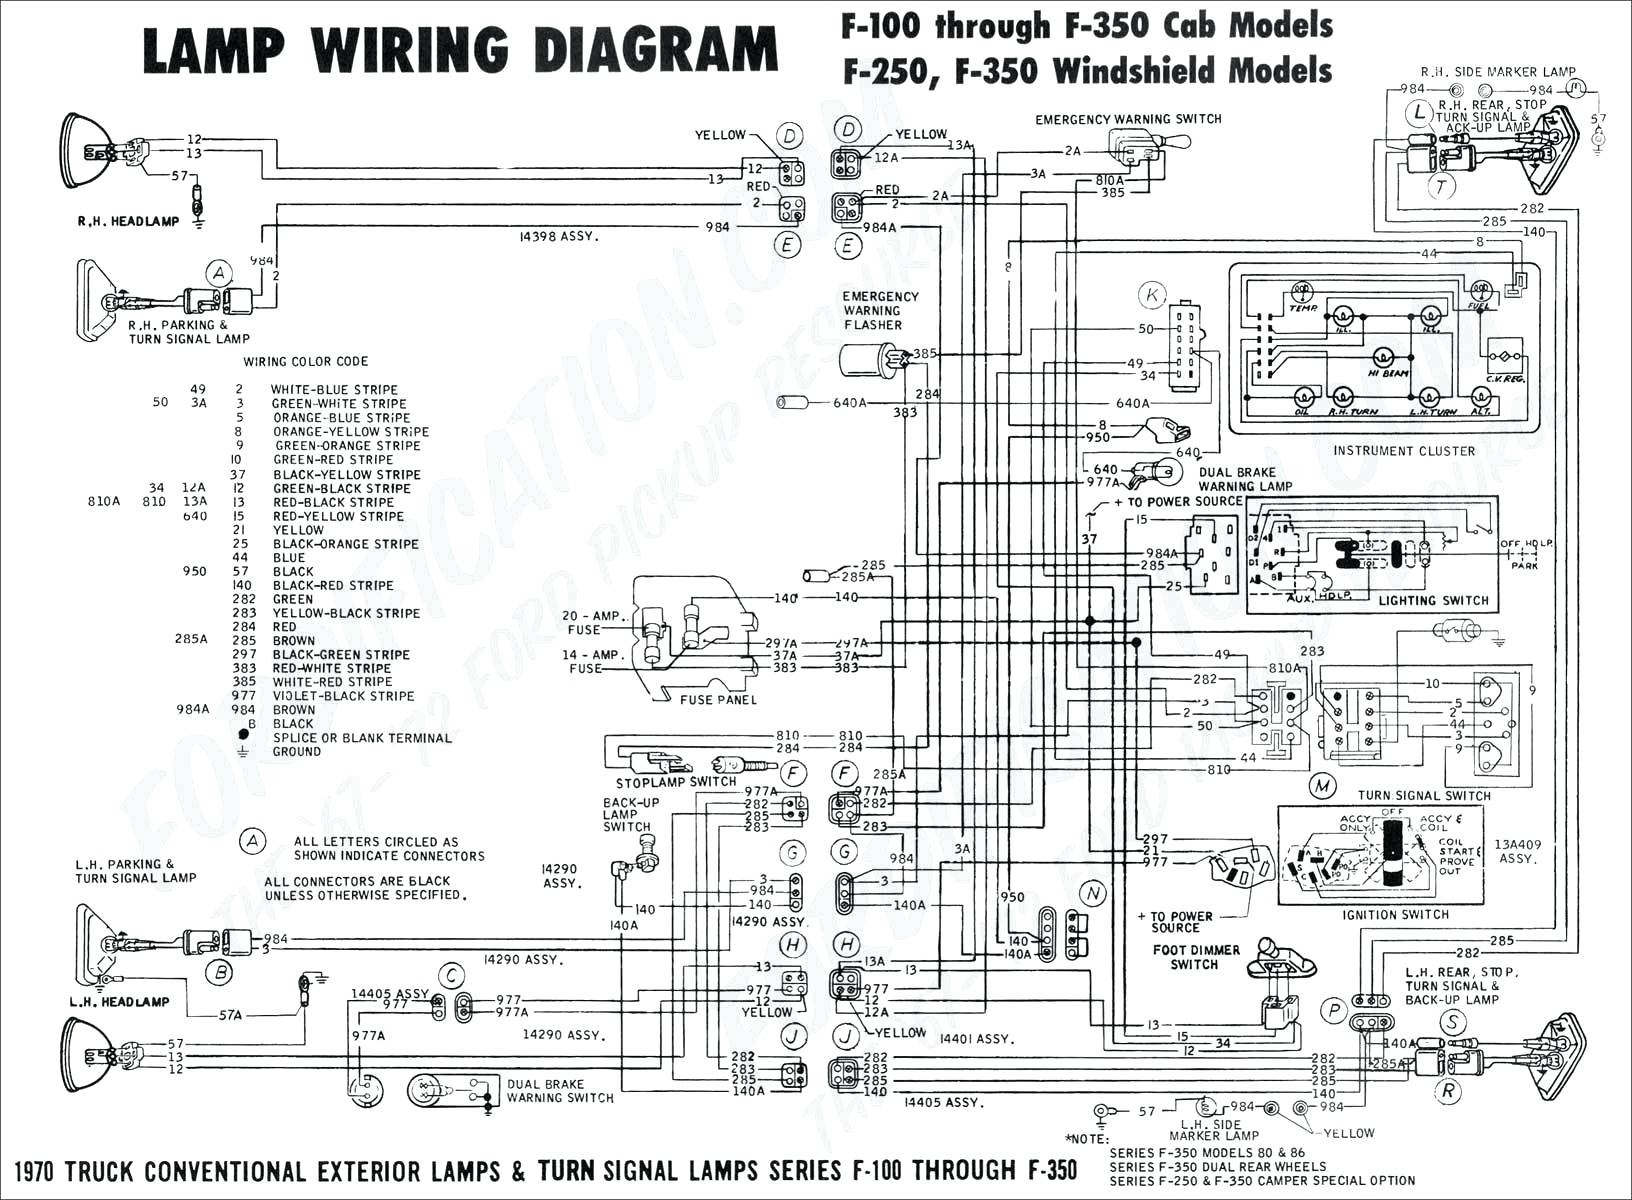 fuse box diagram ford truck enthusiasts forums autos weblog wire rh javastraat co Ford F 150 Trailer Wiring Harness Ford Trailer Harness Adapter